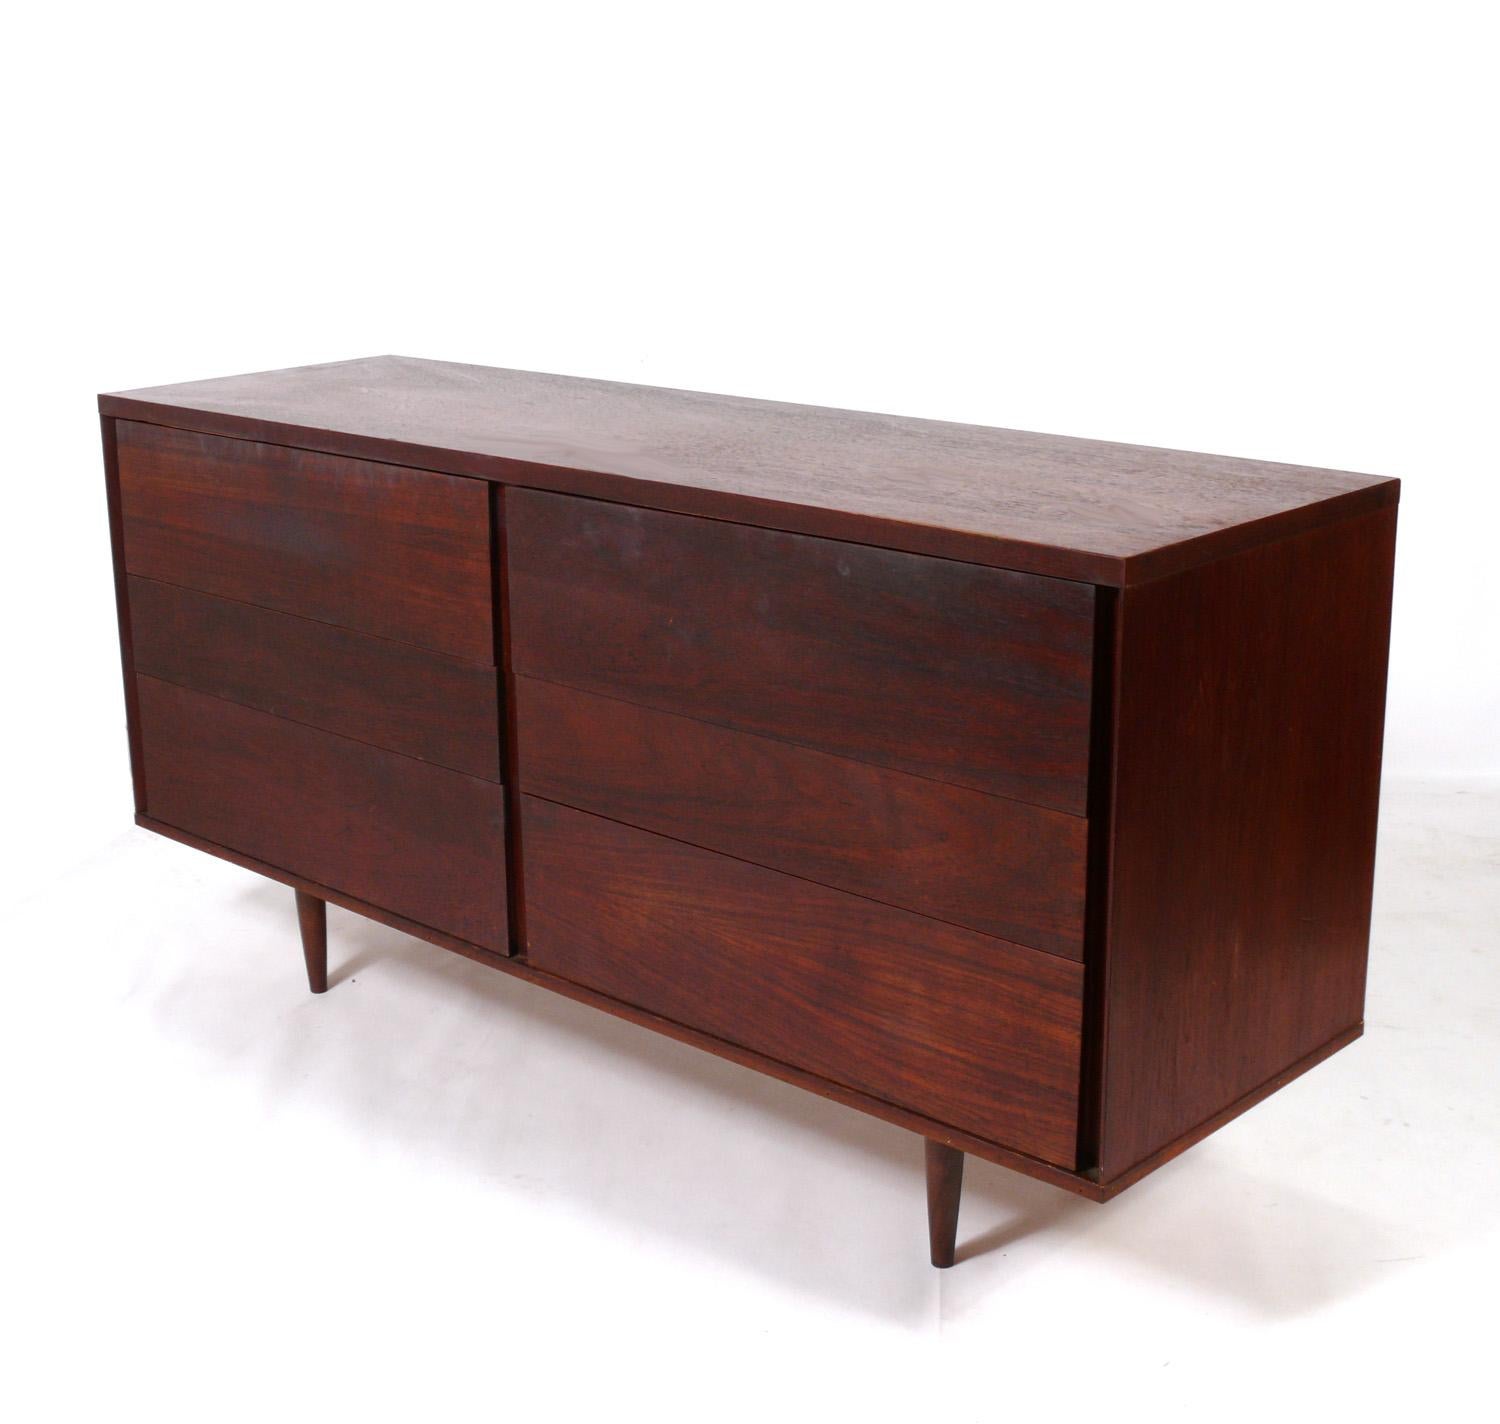 Selection of Danish Modern Walnut Chests or Dressers, Denmark, circa 1960s. Imported by John Stuart of NYC. John Stuart imported Danish designs by Finn Juhl. Arne Vodder, Hans Wegner, etc, but we are unsure of the designer of these chests. They are